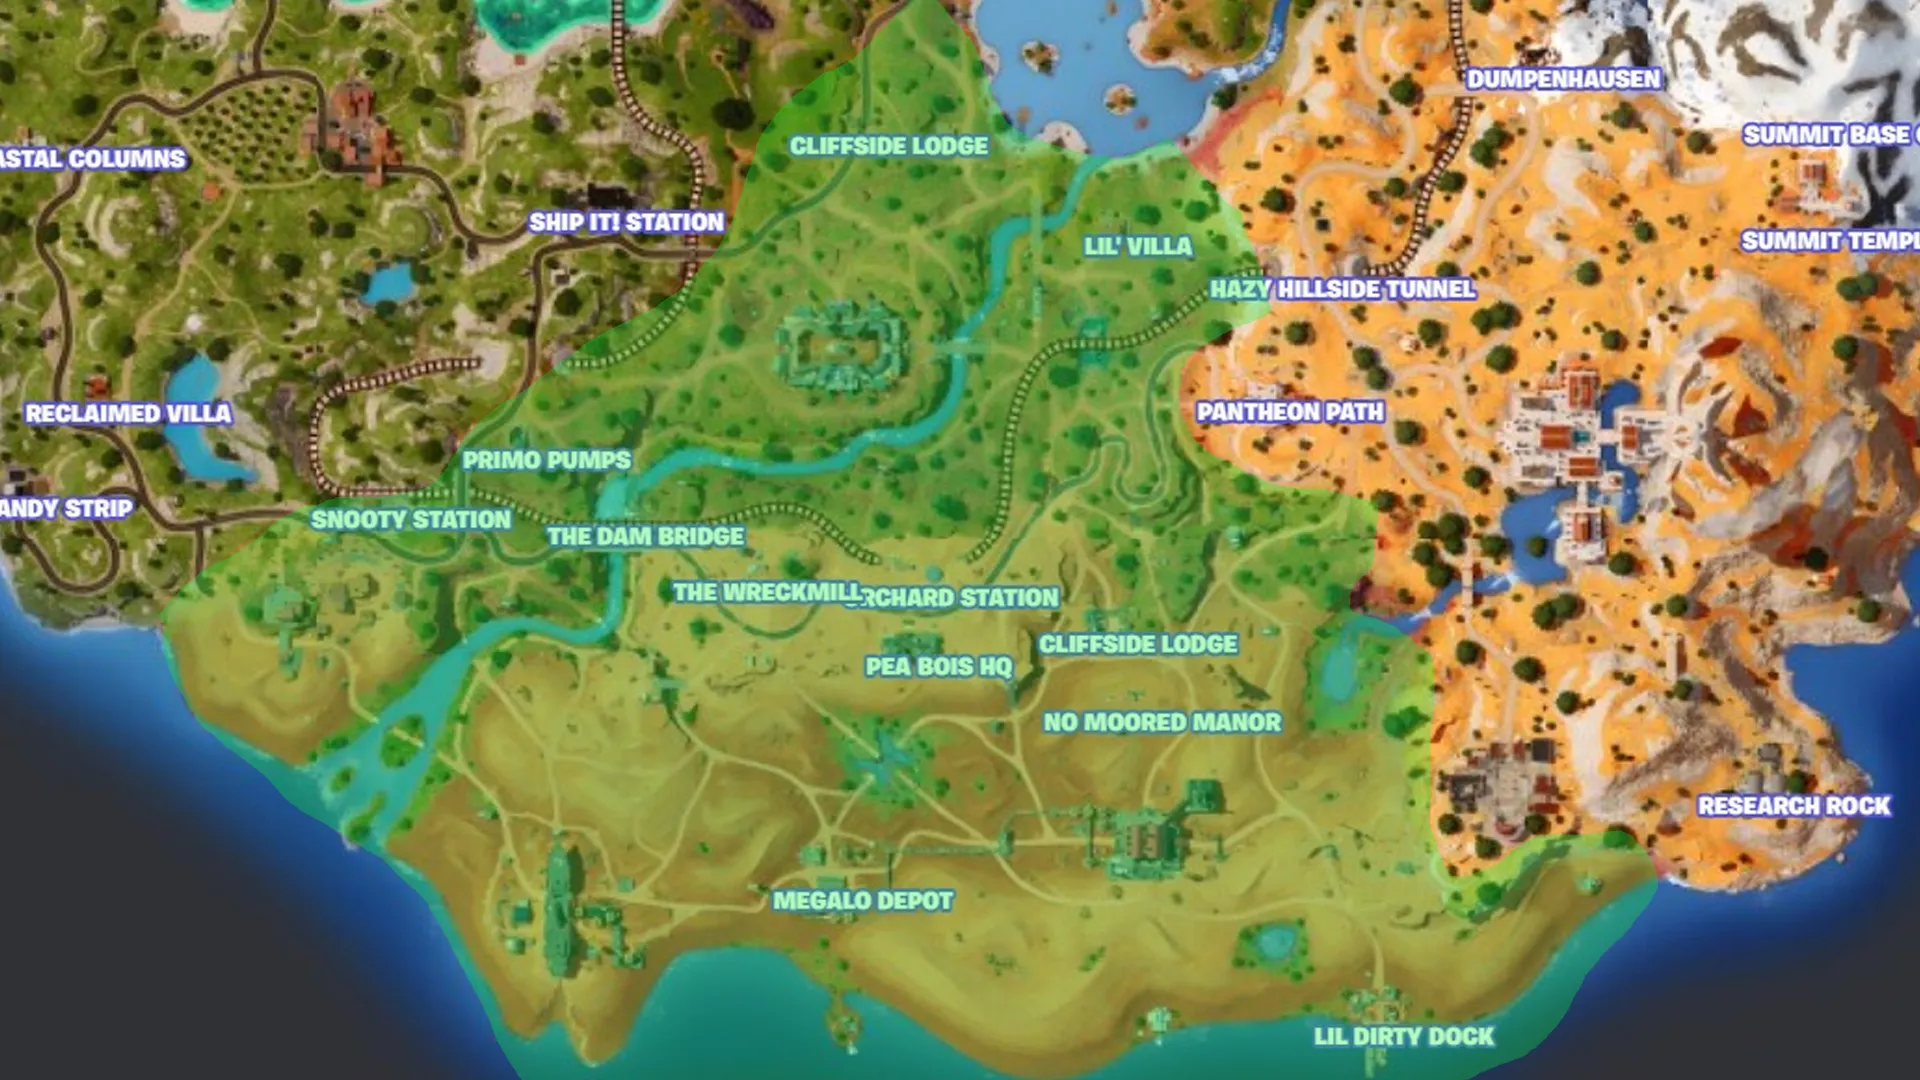 How to Search Containers at Wasteland Landmarks in Fortnite